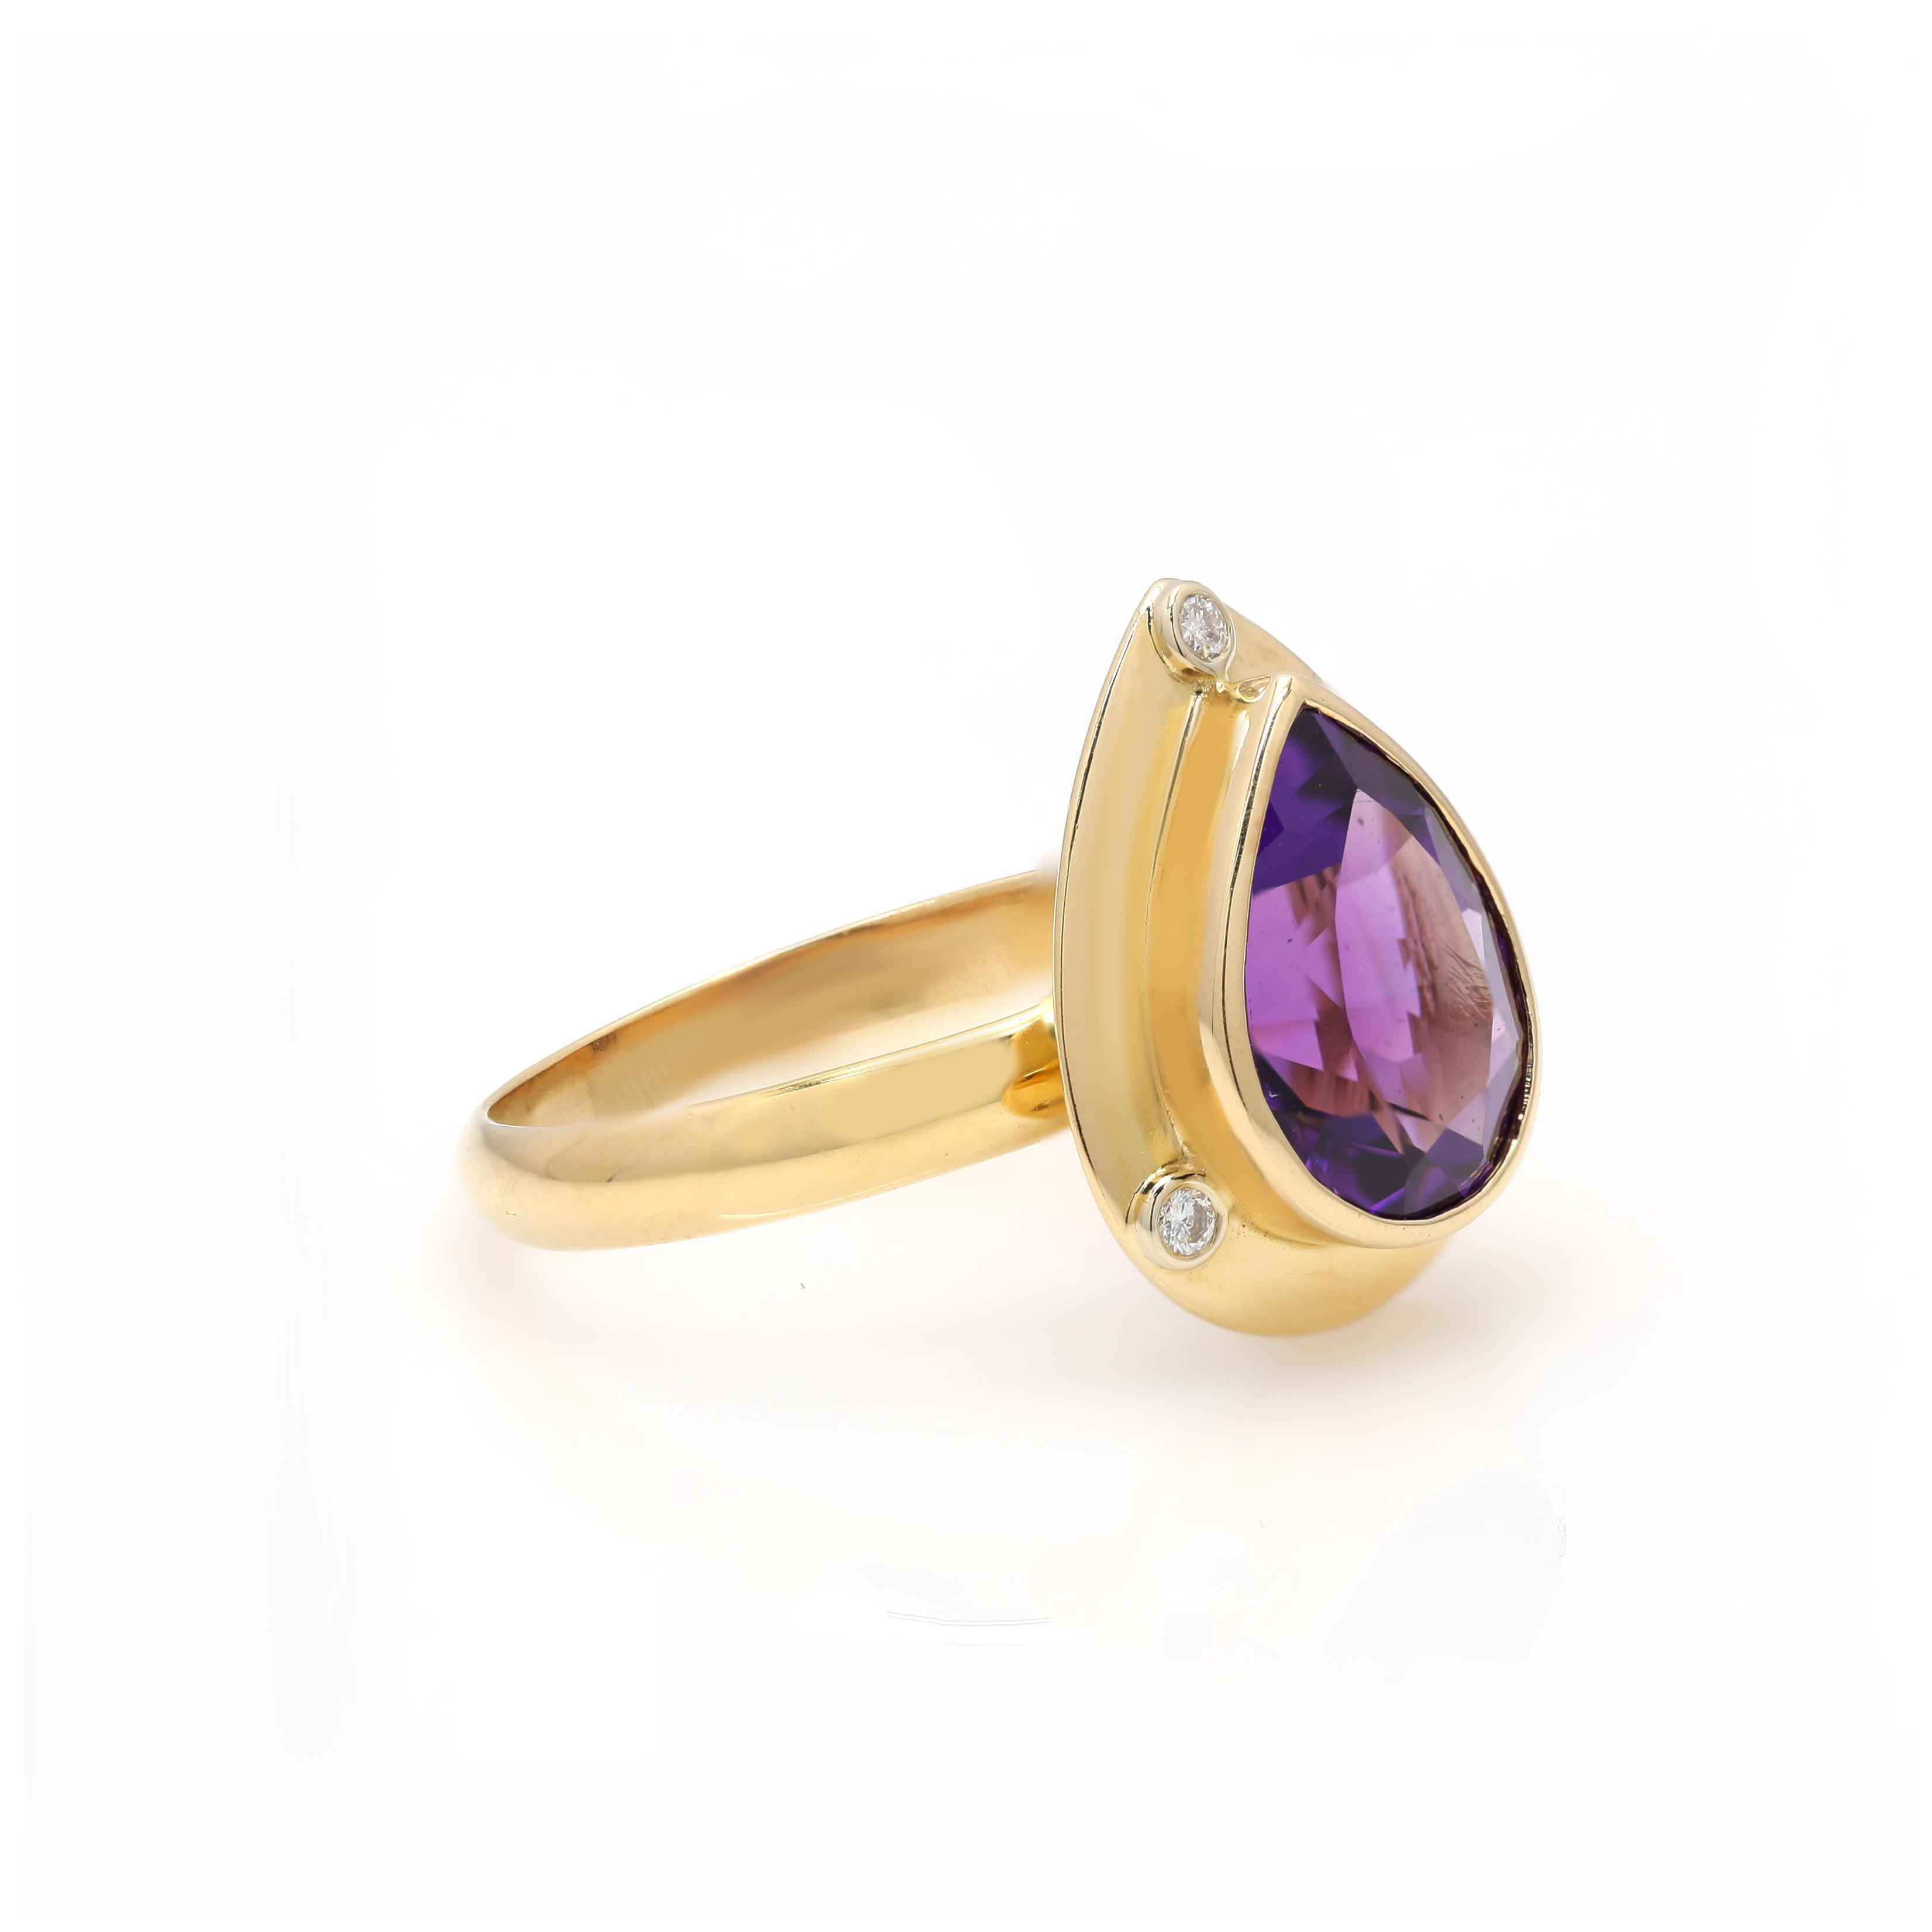 For Sale:  Estelar 2.45ct Amethyst Ring with Diamonds Mounted with 18k Yellow Gold 2